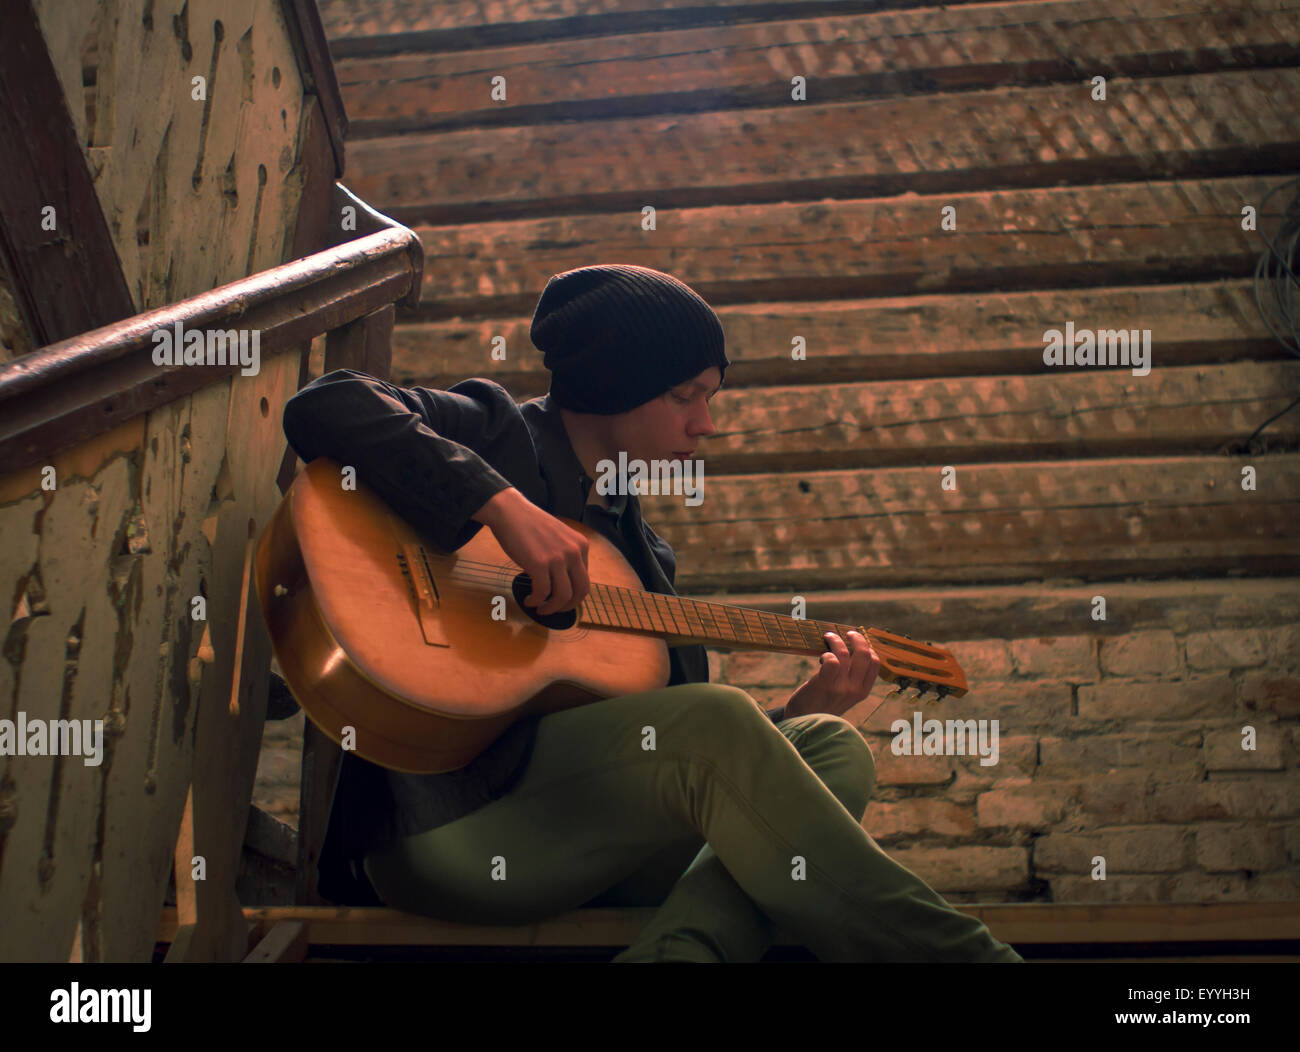 Caucasian man playing guitar on staircase Stock Photo